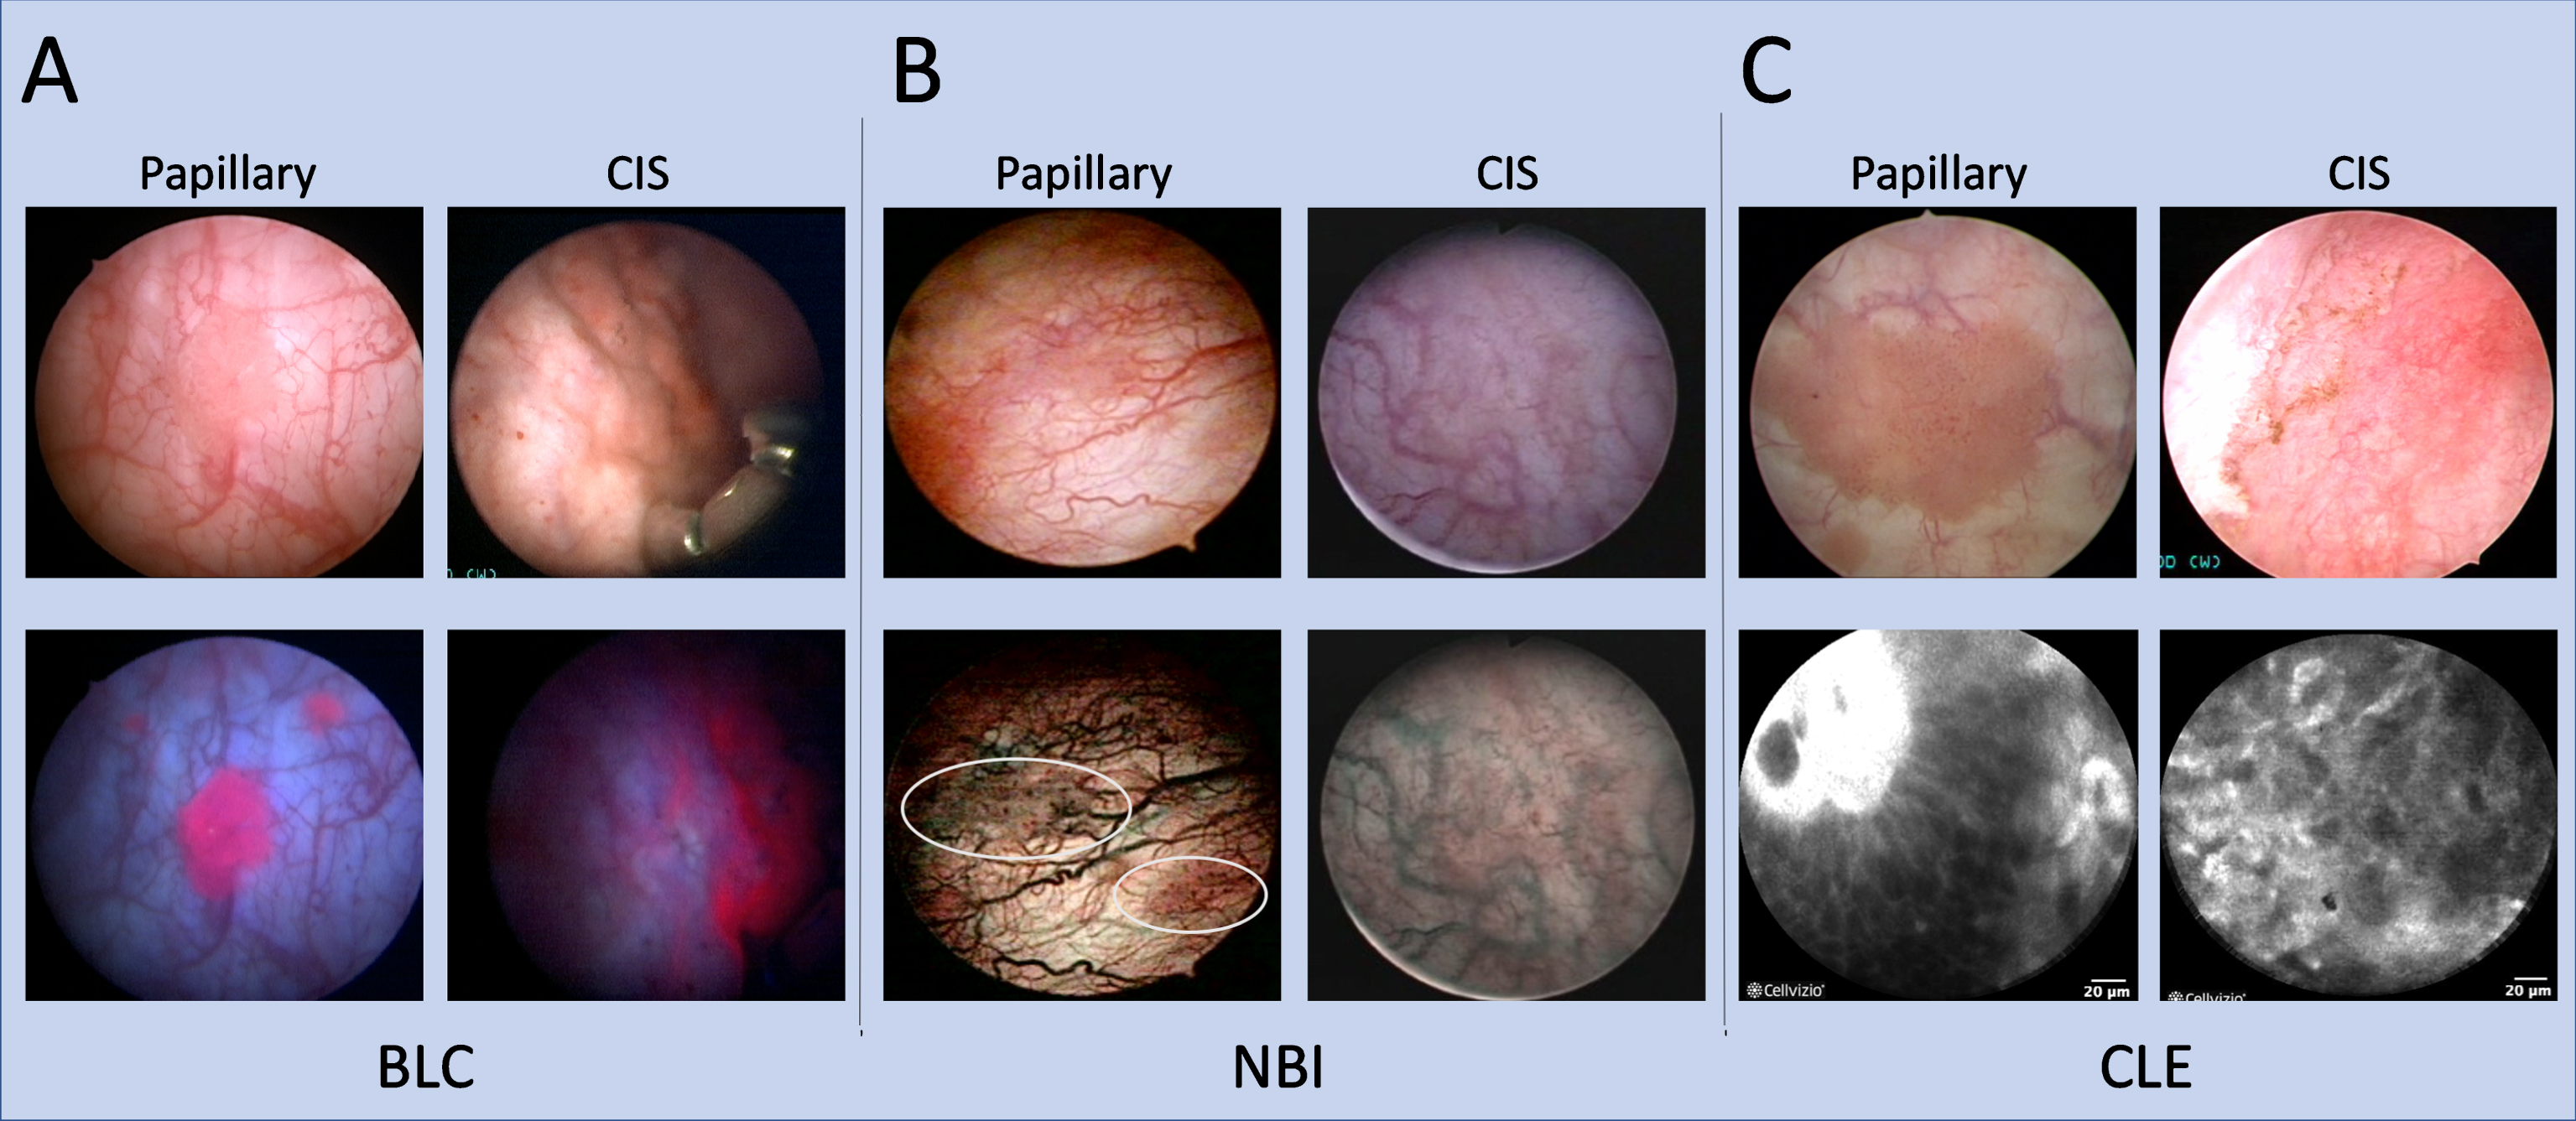 Imaging modalities for improved bladder tumor detection. Papillary and CIS bladder lesions visualized with BLC, NBI, and CLE with corresponding white light images. (A) Positive, red fluorescence of small, satellite papillary tumors seen on BLC that may be missed on WLC. For CIS, red fluorescence also noted on BLC of what appears to be normal urothelium on WLC. (B) NBI improves visualization of aberrant tumor vasculature. Two papillary tumors are more easily visualized on NBI (encircled). For CIS detection, a patch of erythema is more pronounced under NBI compared to a relatively normal appearing urothelium on WLC. CIS images for NBI obtained with permission from [80]. (C) CLE of papillary tumors and CIS provide microscopic detail that can augment macroscopic imaging. A fibrovascular stalk may be visualized as noted in the top left of the papillary CLE example. CIS is notable for a disorganized architecture with pleomorphic cells and indistinct cellular borders.